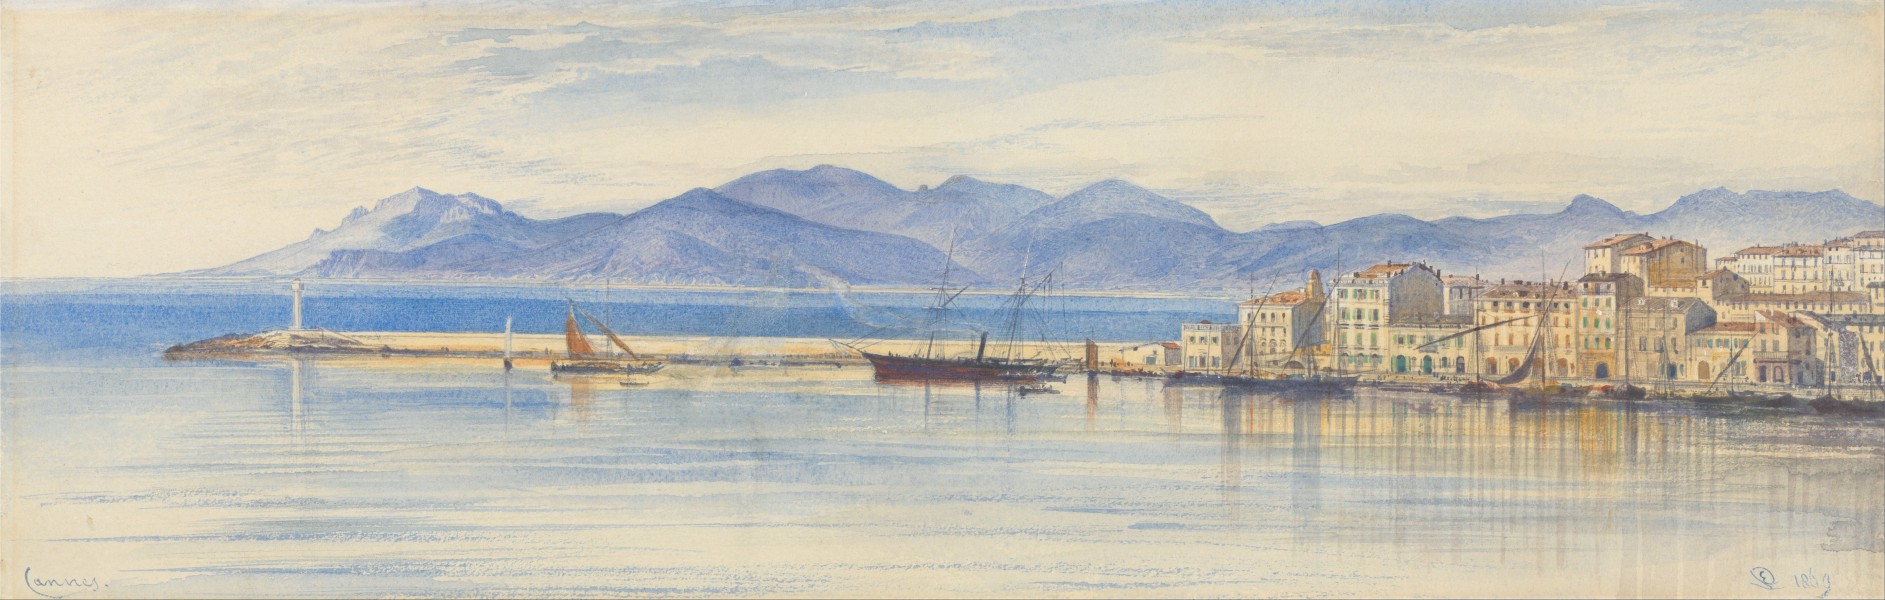 Edward Lear - A View of the Harbour at Cannes - Google Art Project